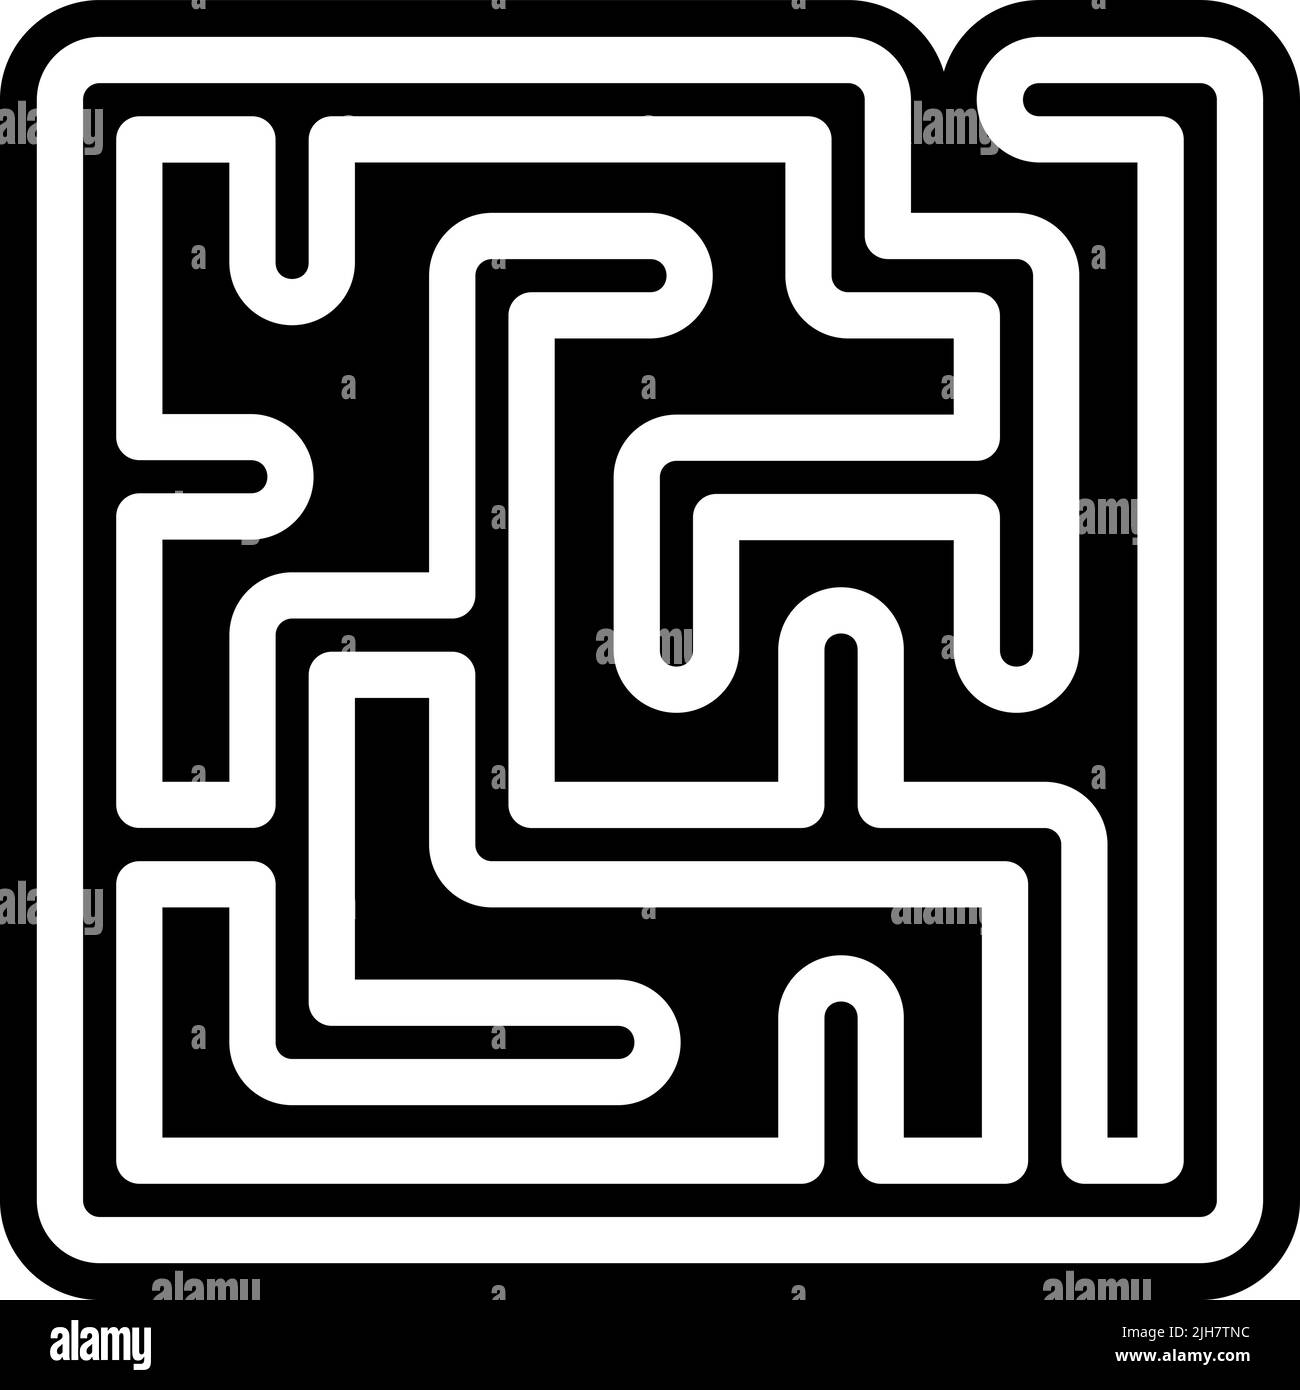 Video game elements labyrinth icon Stock Vector